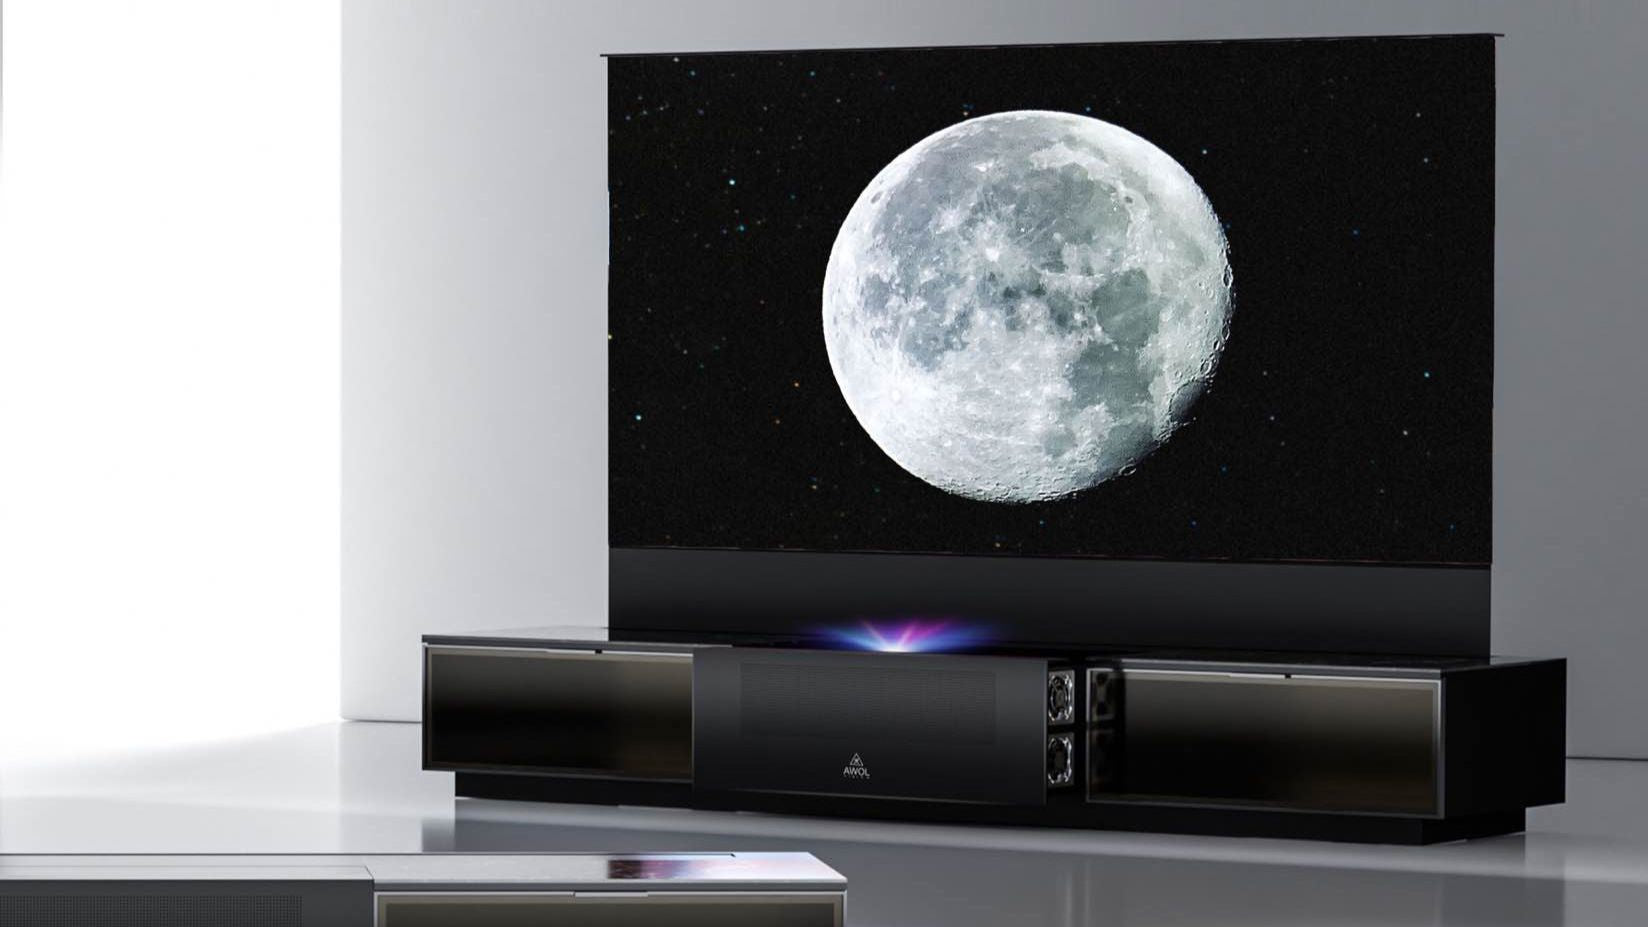 High-definition projector displaying a detailed image of the moon on a large screen.